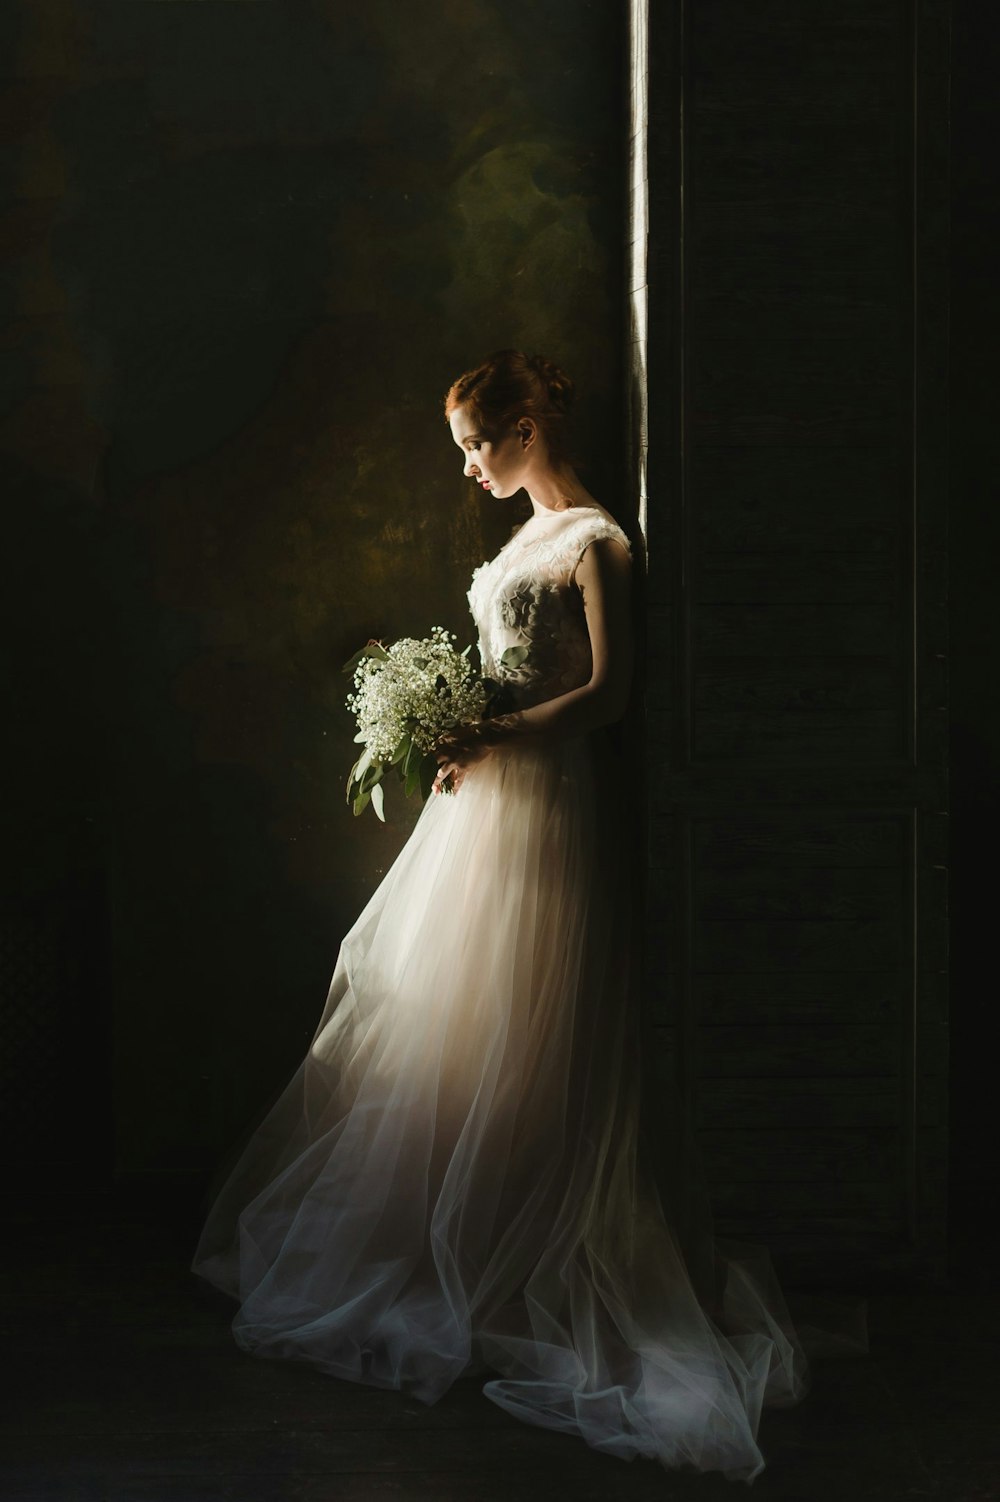 woman wearing wedding gown white holding bouquet